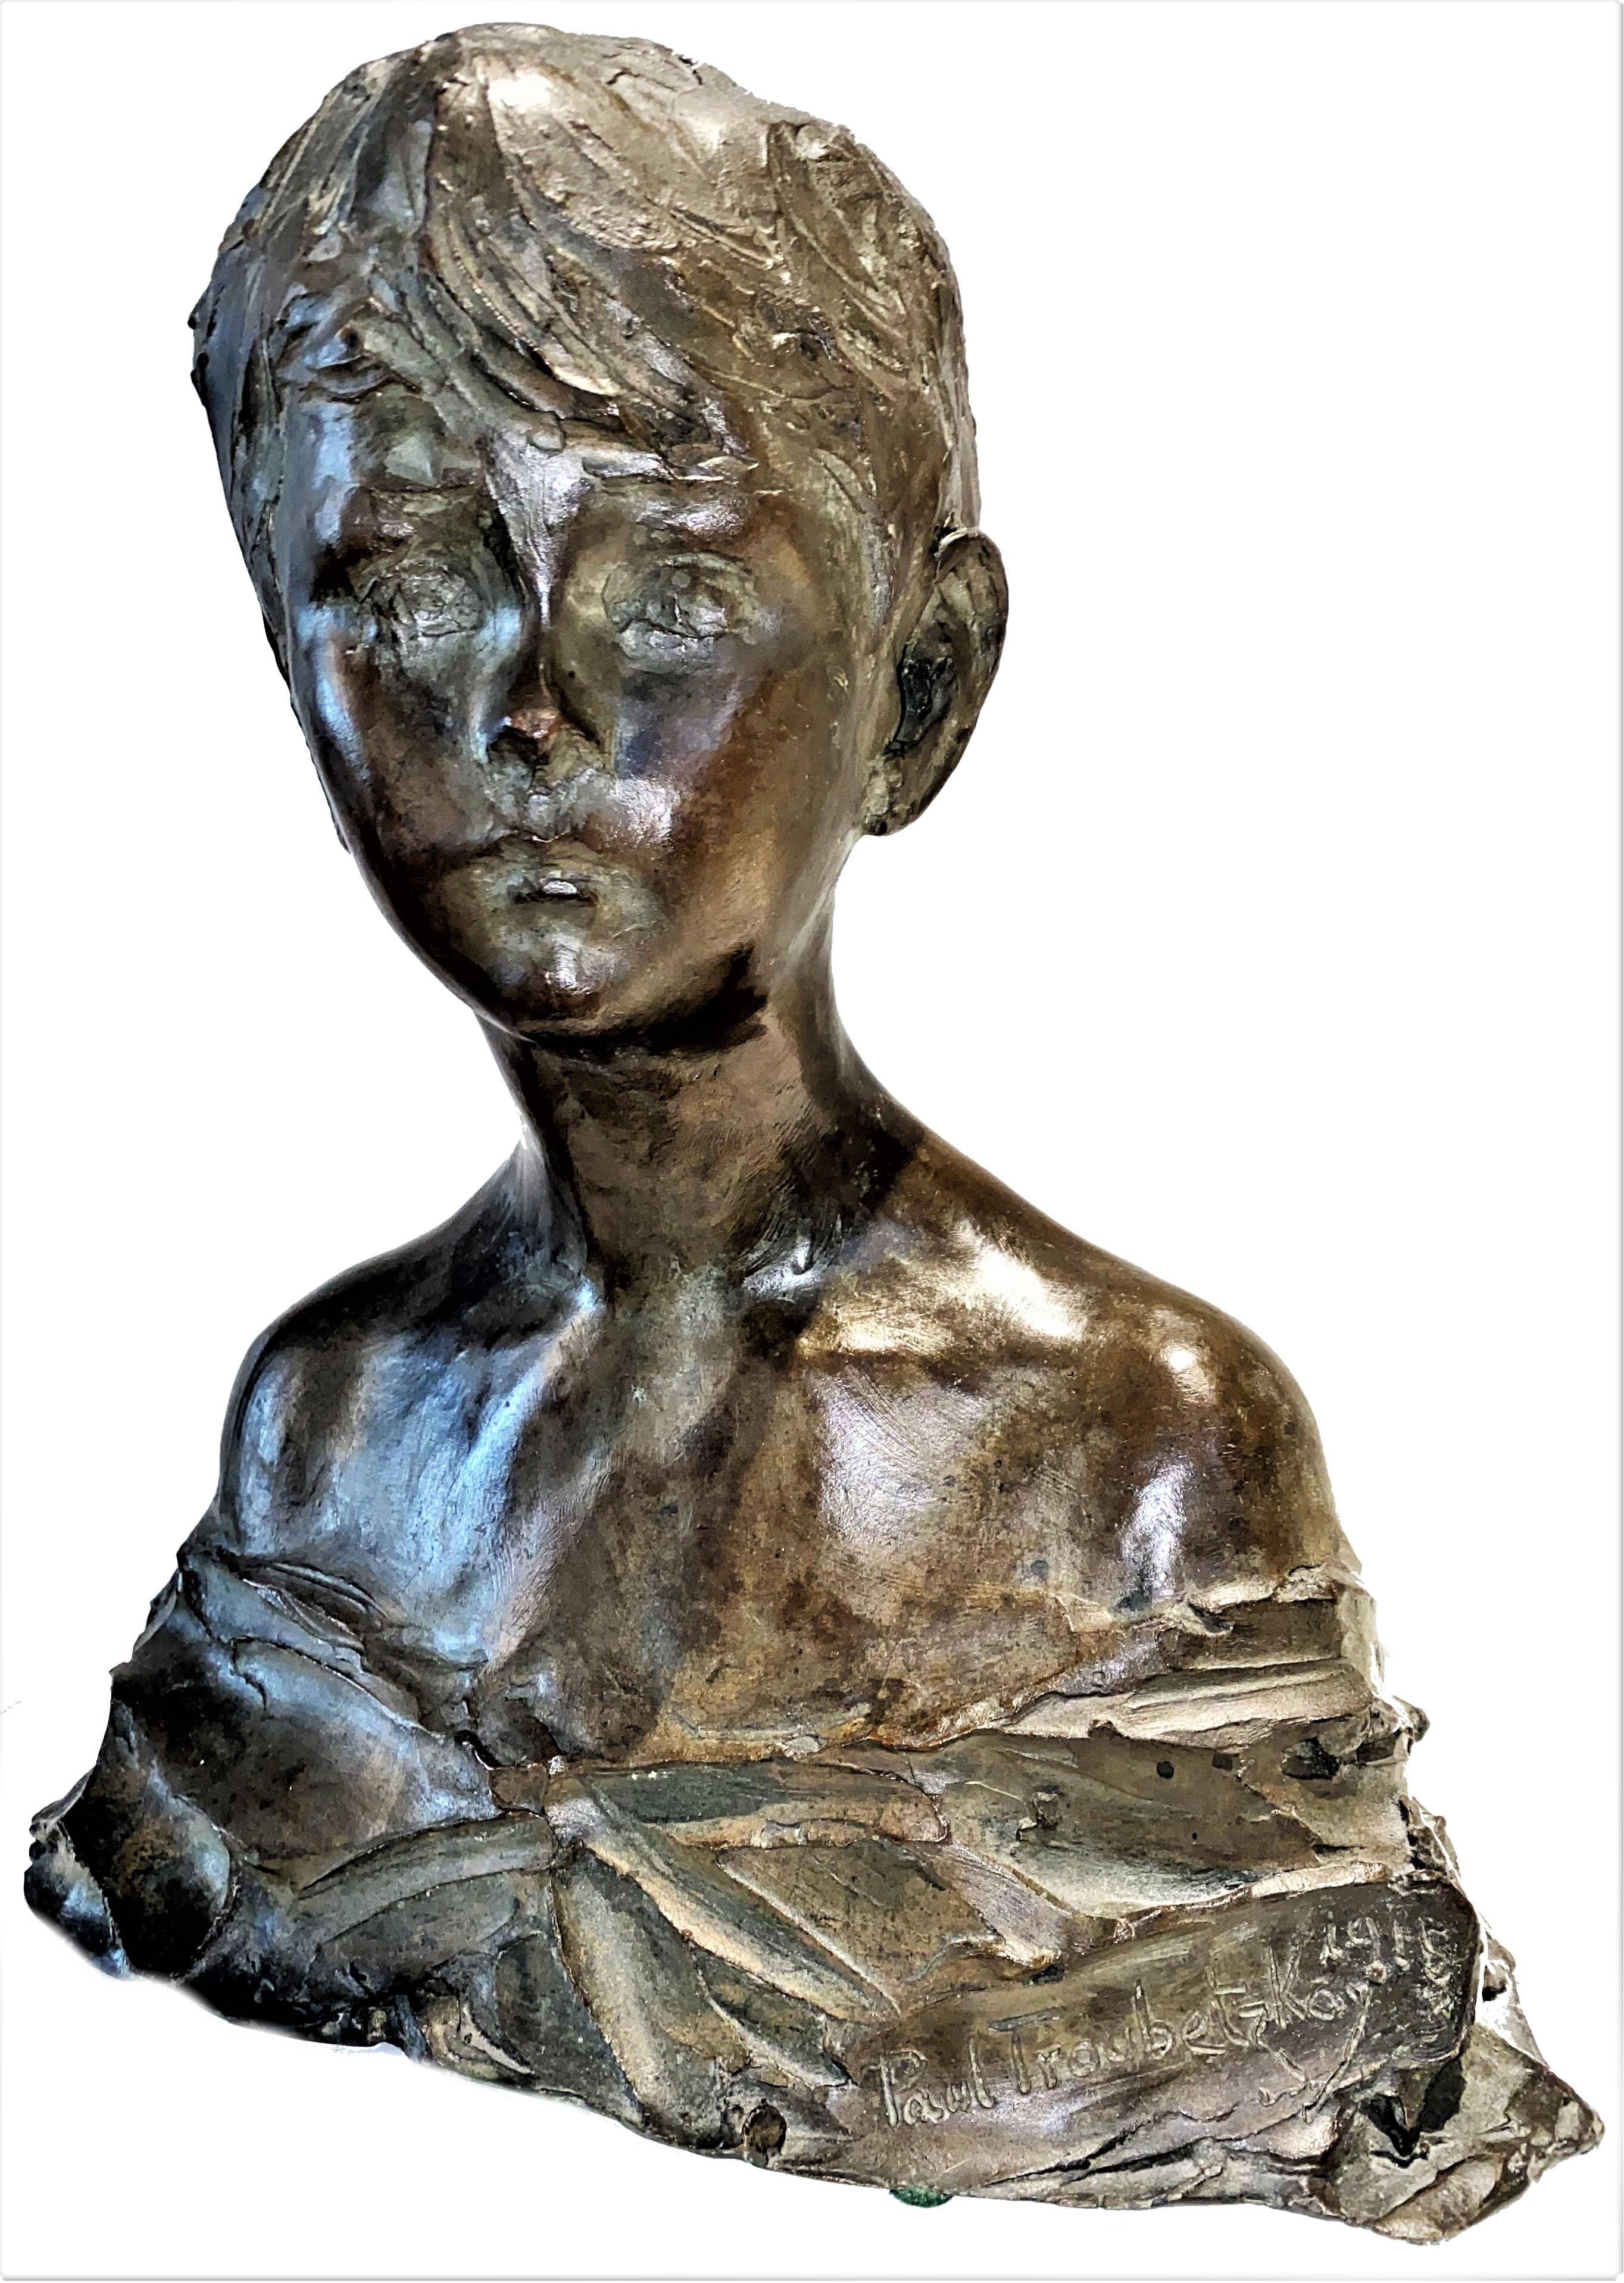 Signed & dated ‘Paul Troubetskoy ‘15’.
Original dark-brown patina.
Roman Bronze Works foundry stamp.

Dimensions:
Height: 12.5 inches (31.25cm)
Width: 11.5 inches (28.75cm)
Depth: 9 inches

Prince Paolo Petrovich Troubetzkoy